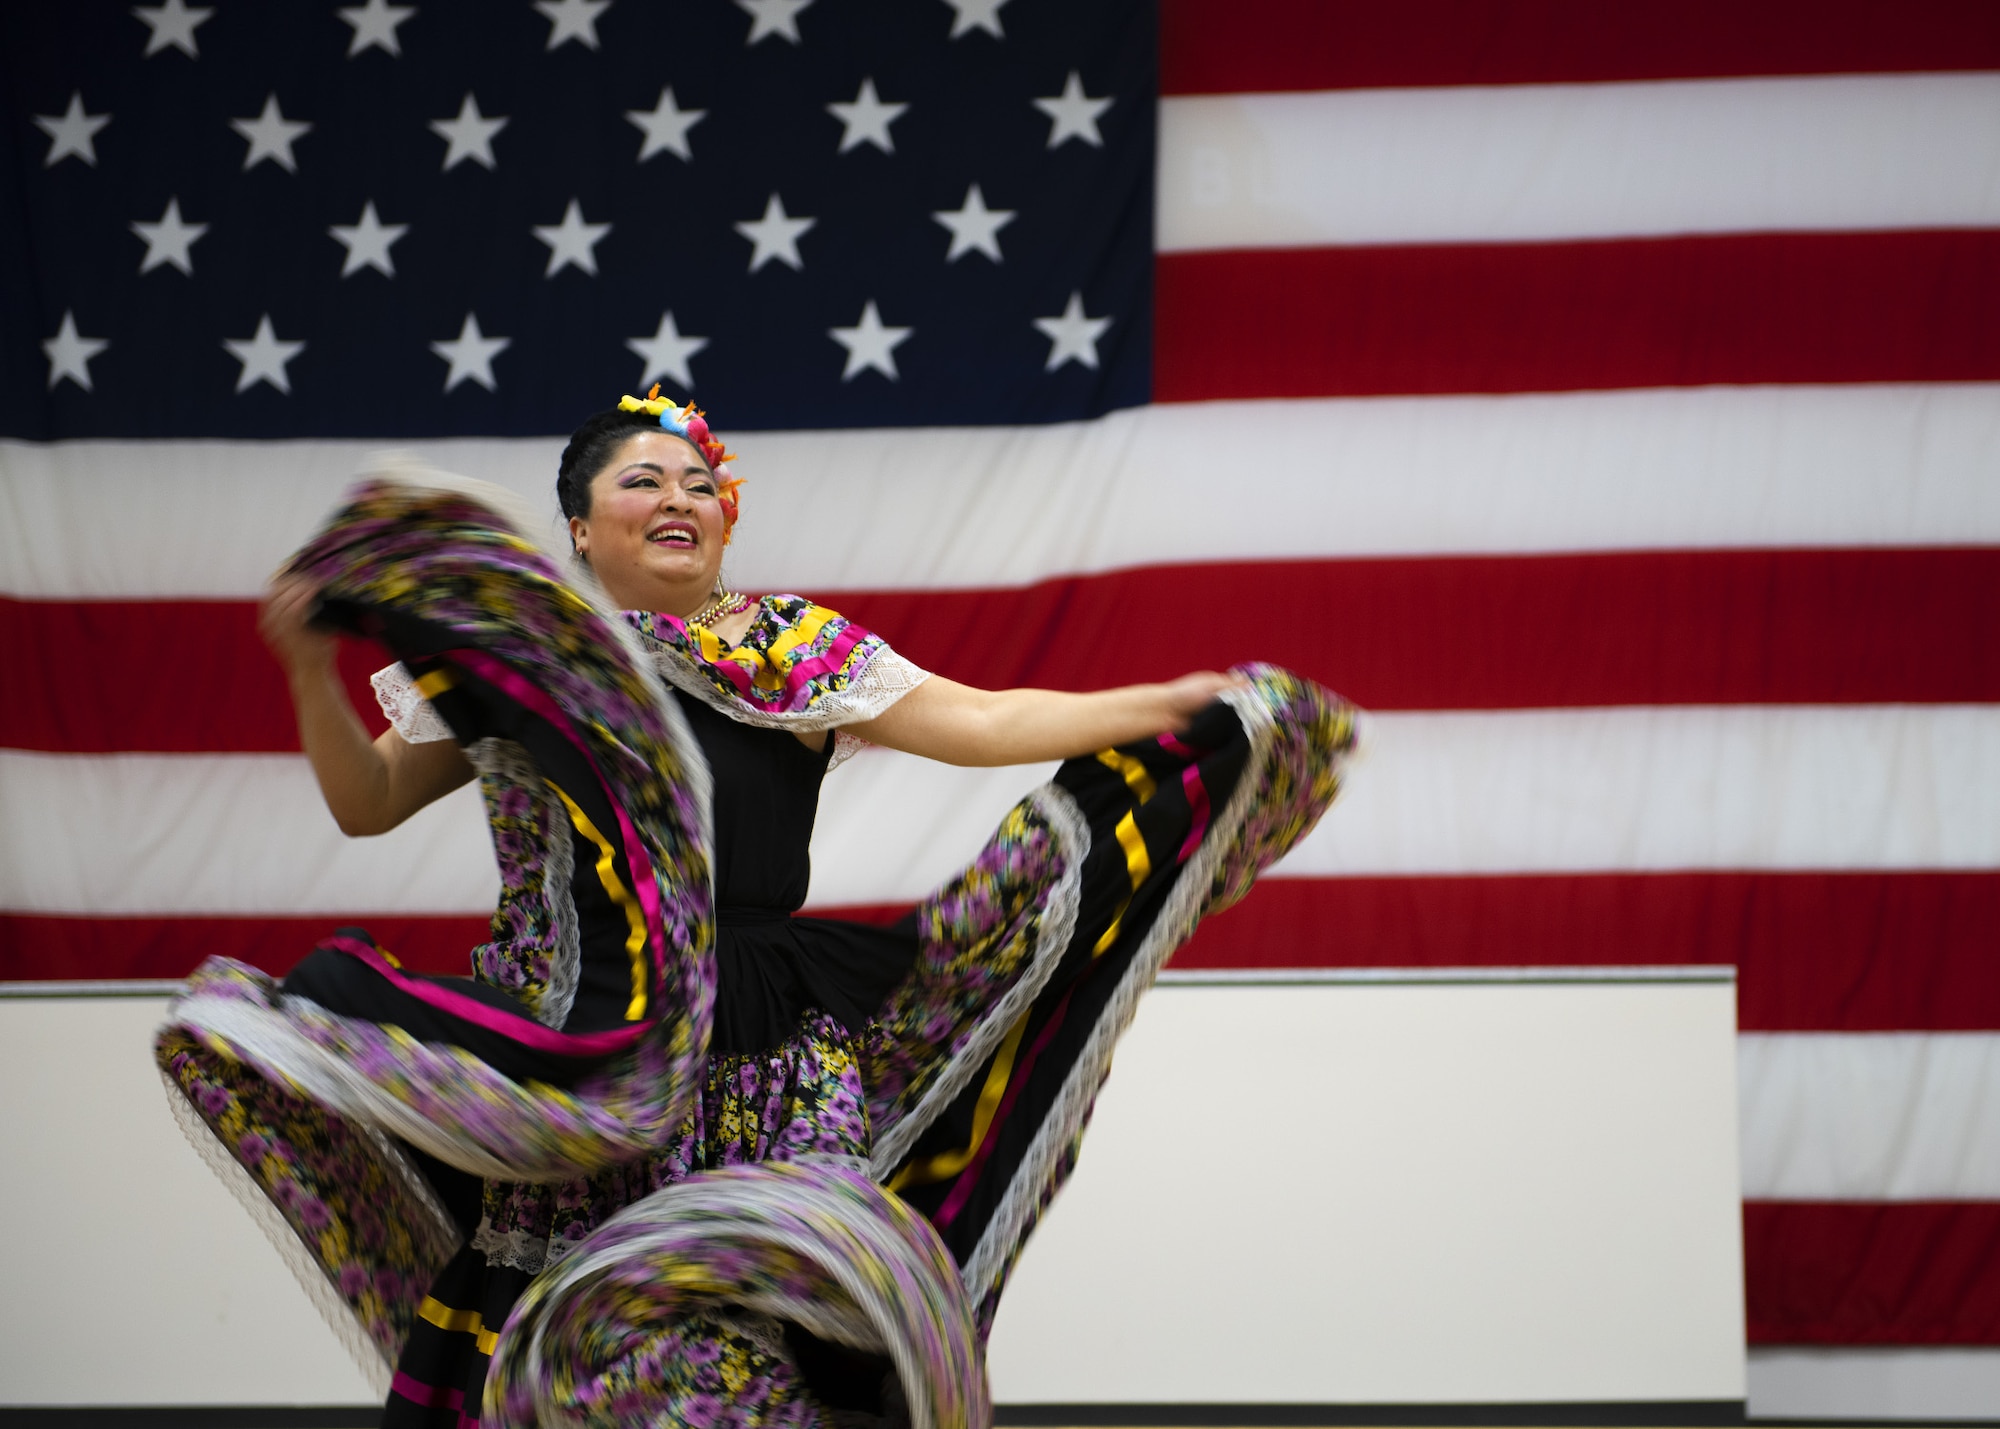 A member of the Ollin Yoliztli Mexican Folklore Dance Academy performs a traditional dance during the Hispanic Heritage Month closing ceremony at the Navy Operational Support Center, Oct. 15, 2019, at Luke Air Force Base, Ariz.